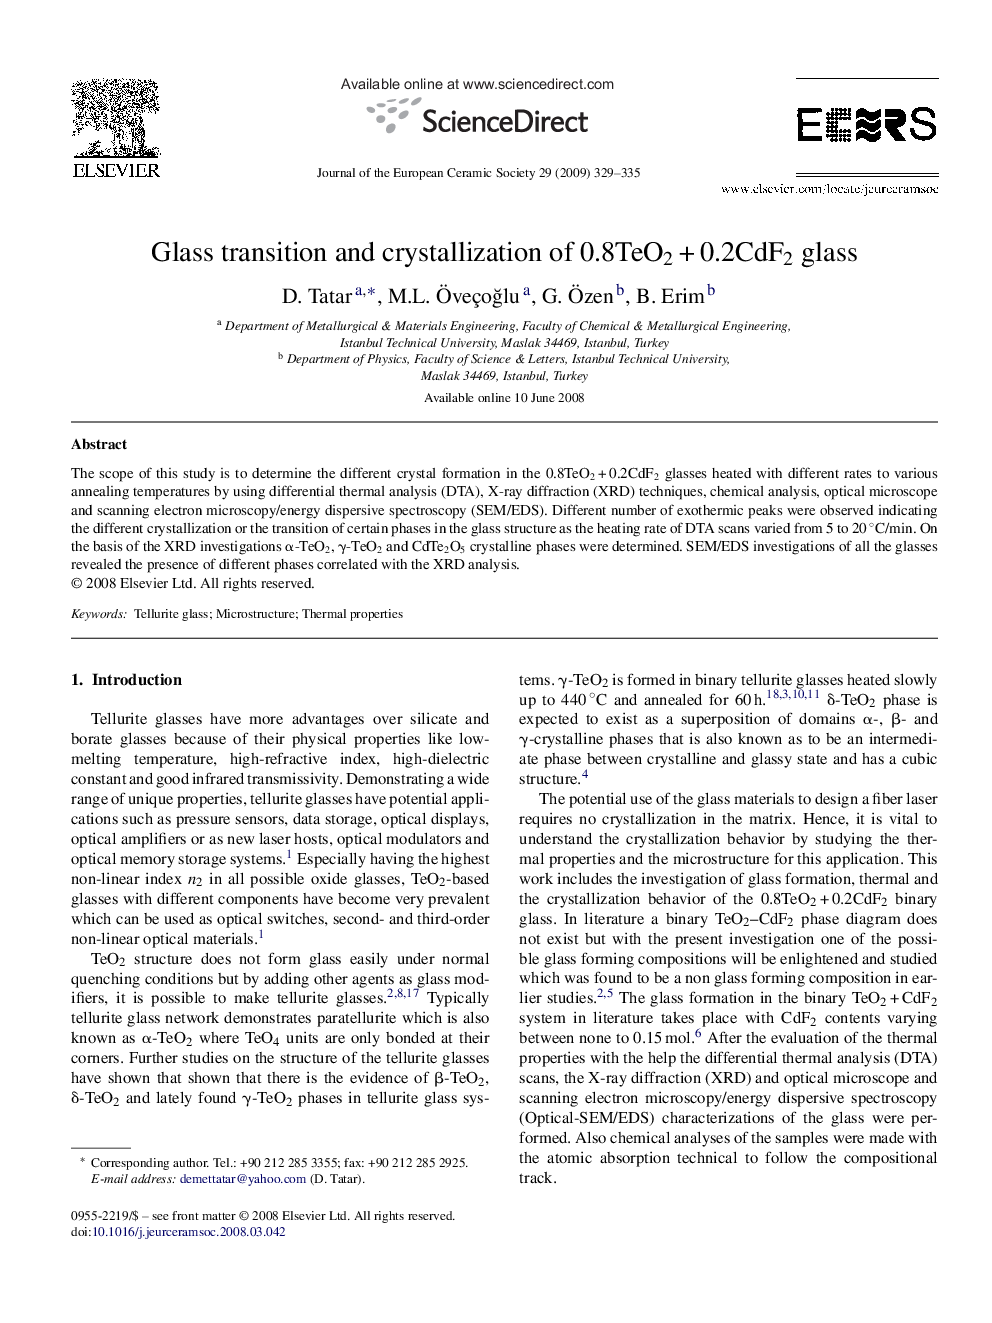 Glass transition and crystallization of 0.8TeO2 + 0.2CdF2 glass